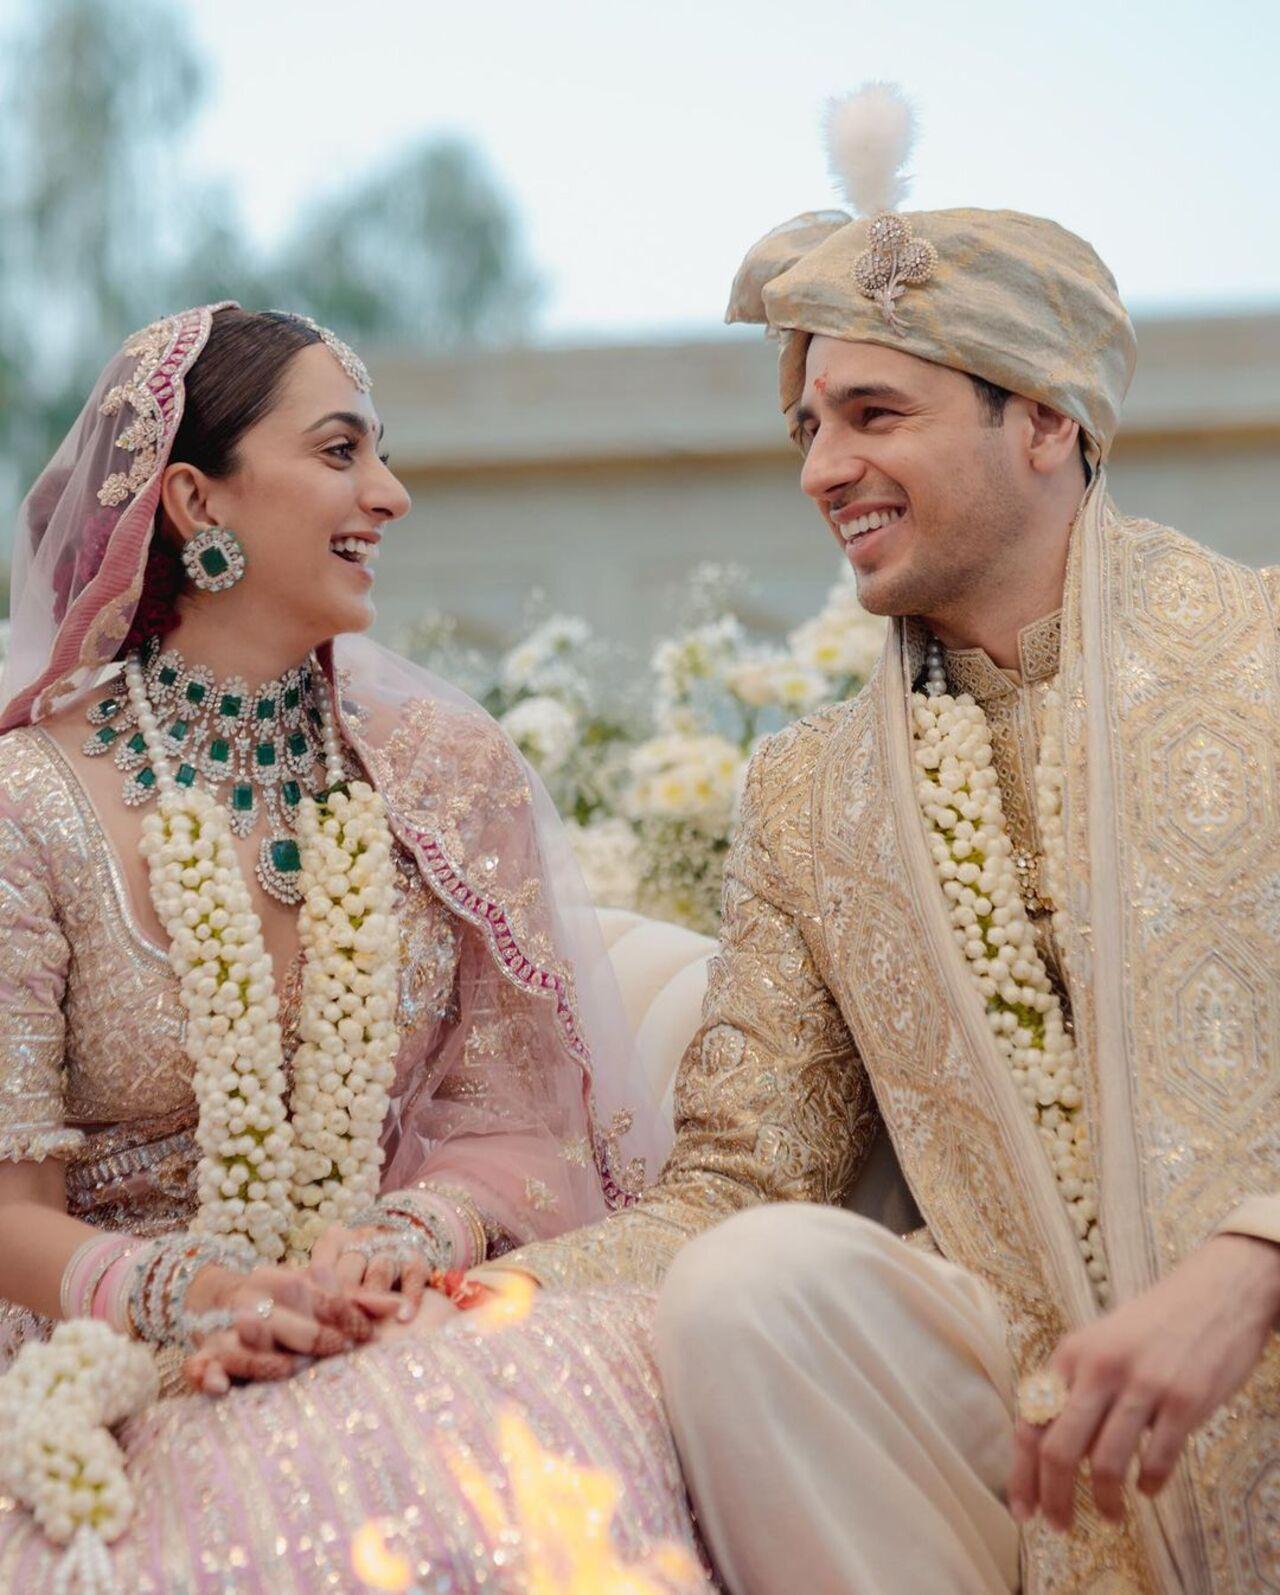 Kiara Advani was a Manish Malhotra bride. She wore an empress rose ombre lehenga with emerald jewellery from the designer's collection. Her outfit had details of Roman architecture 